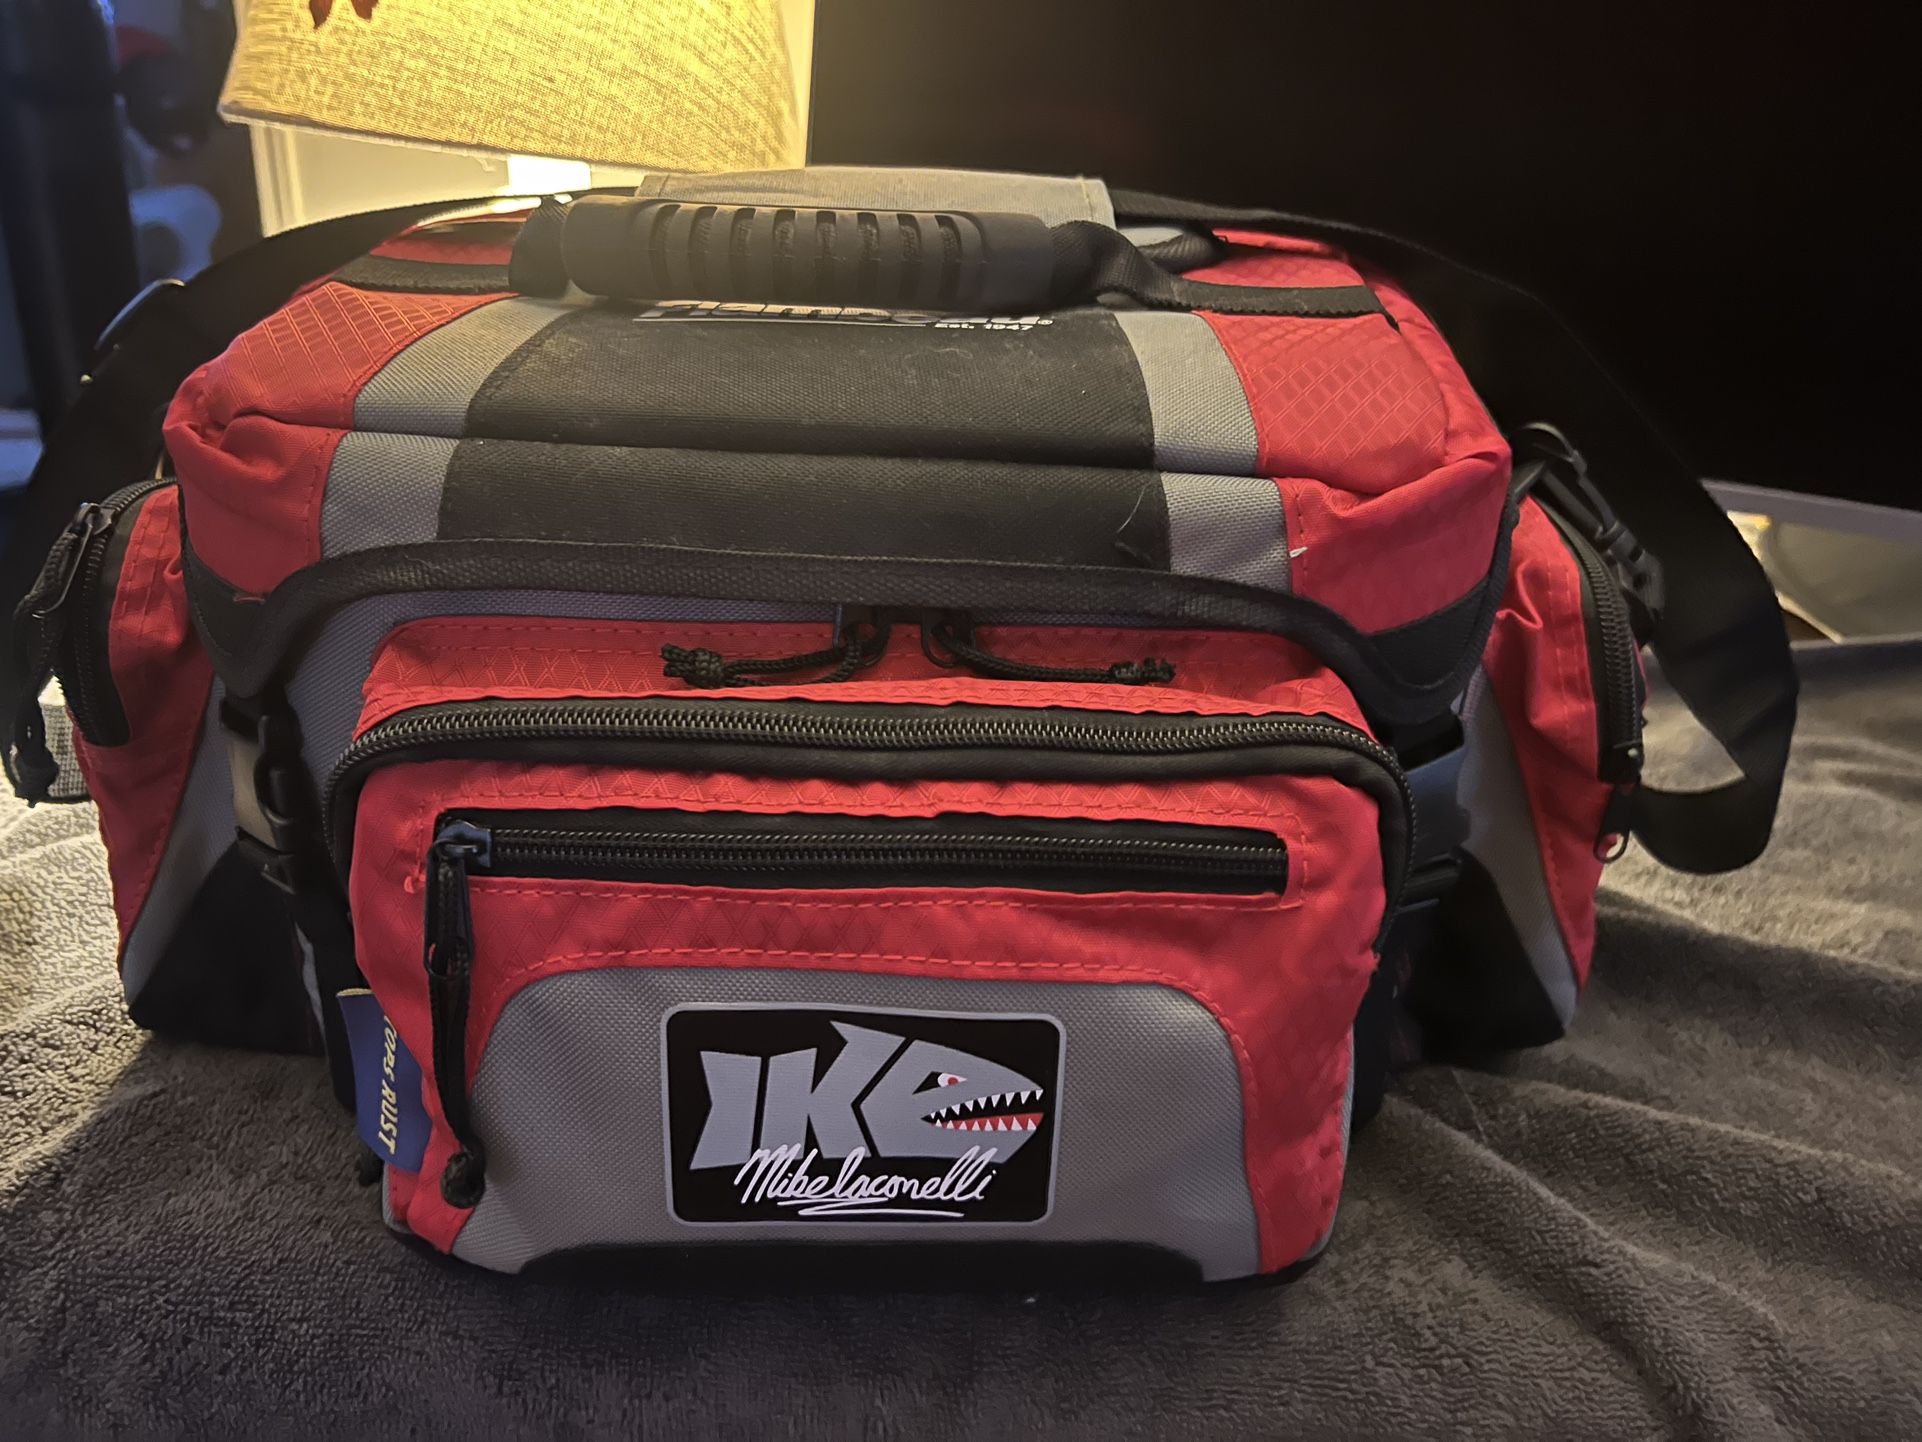 Fishing Tackle Bag & Accessories 